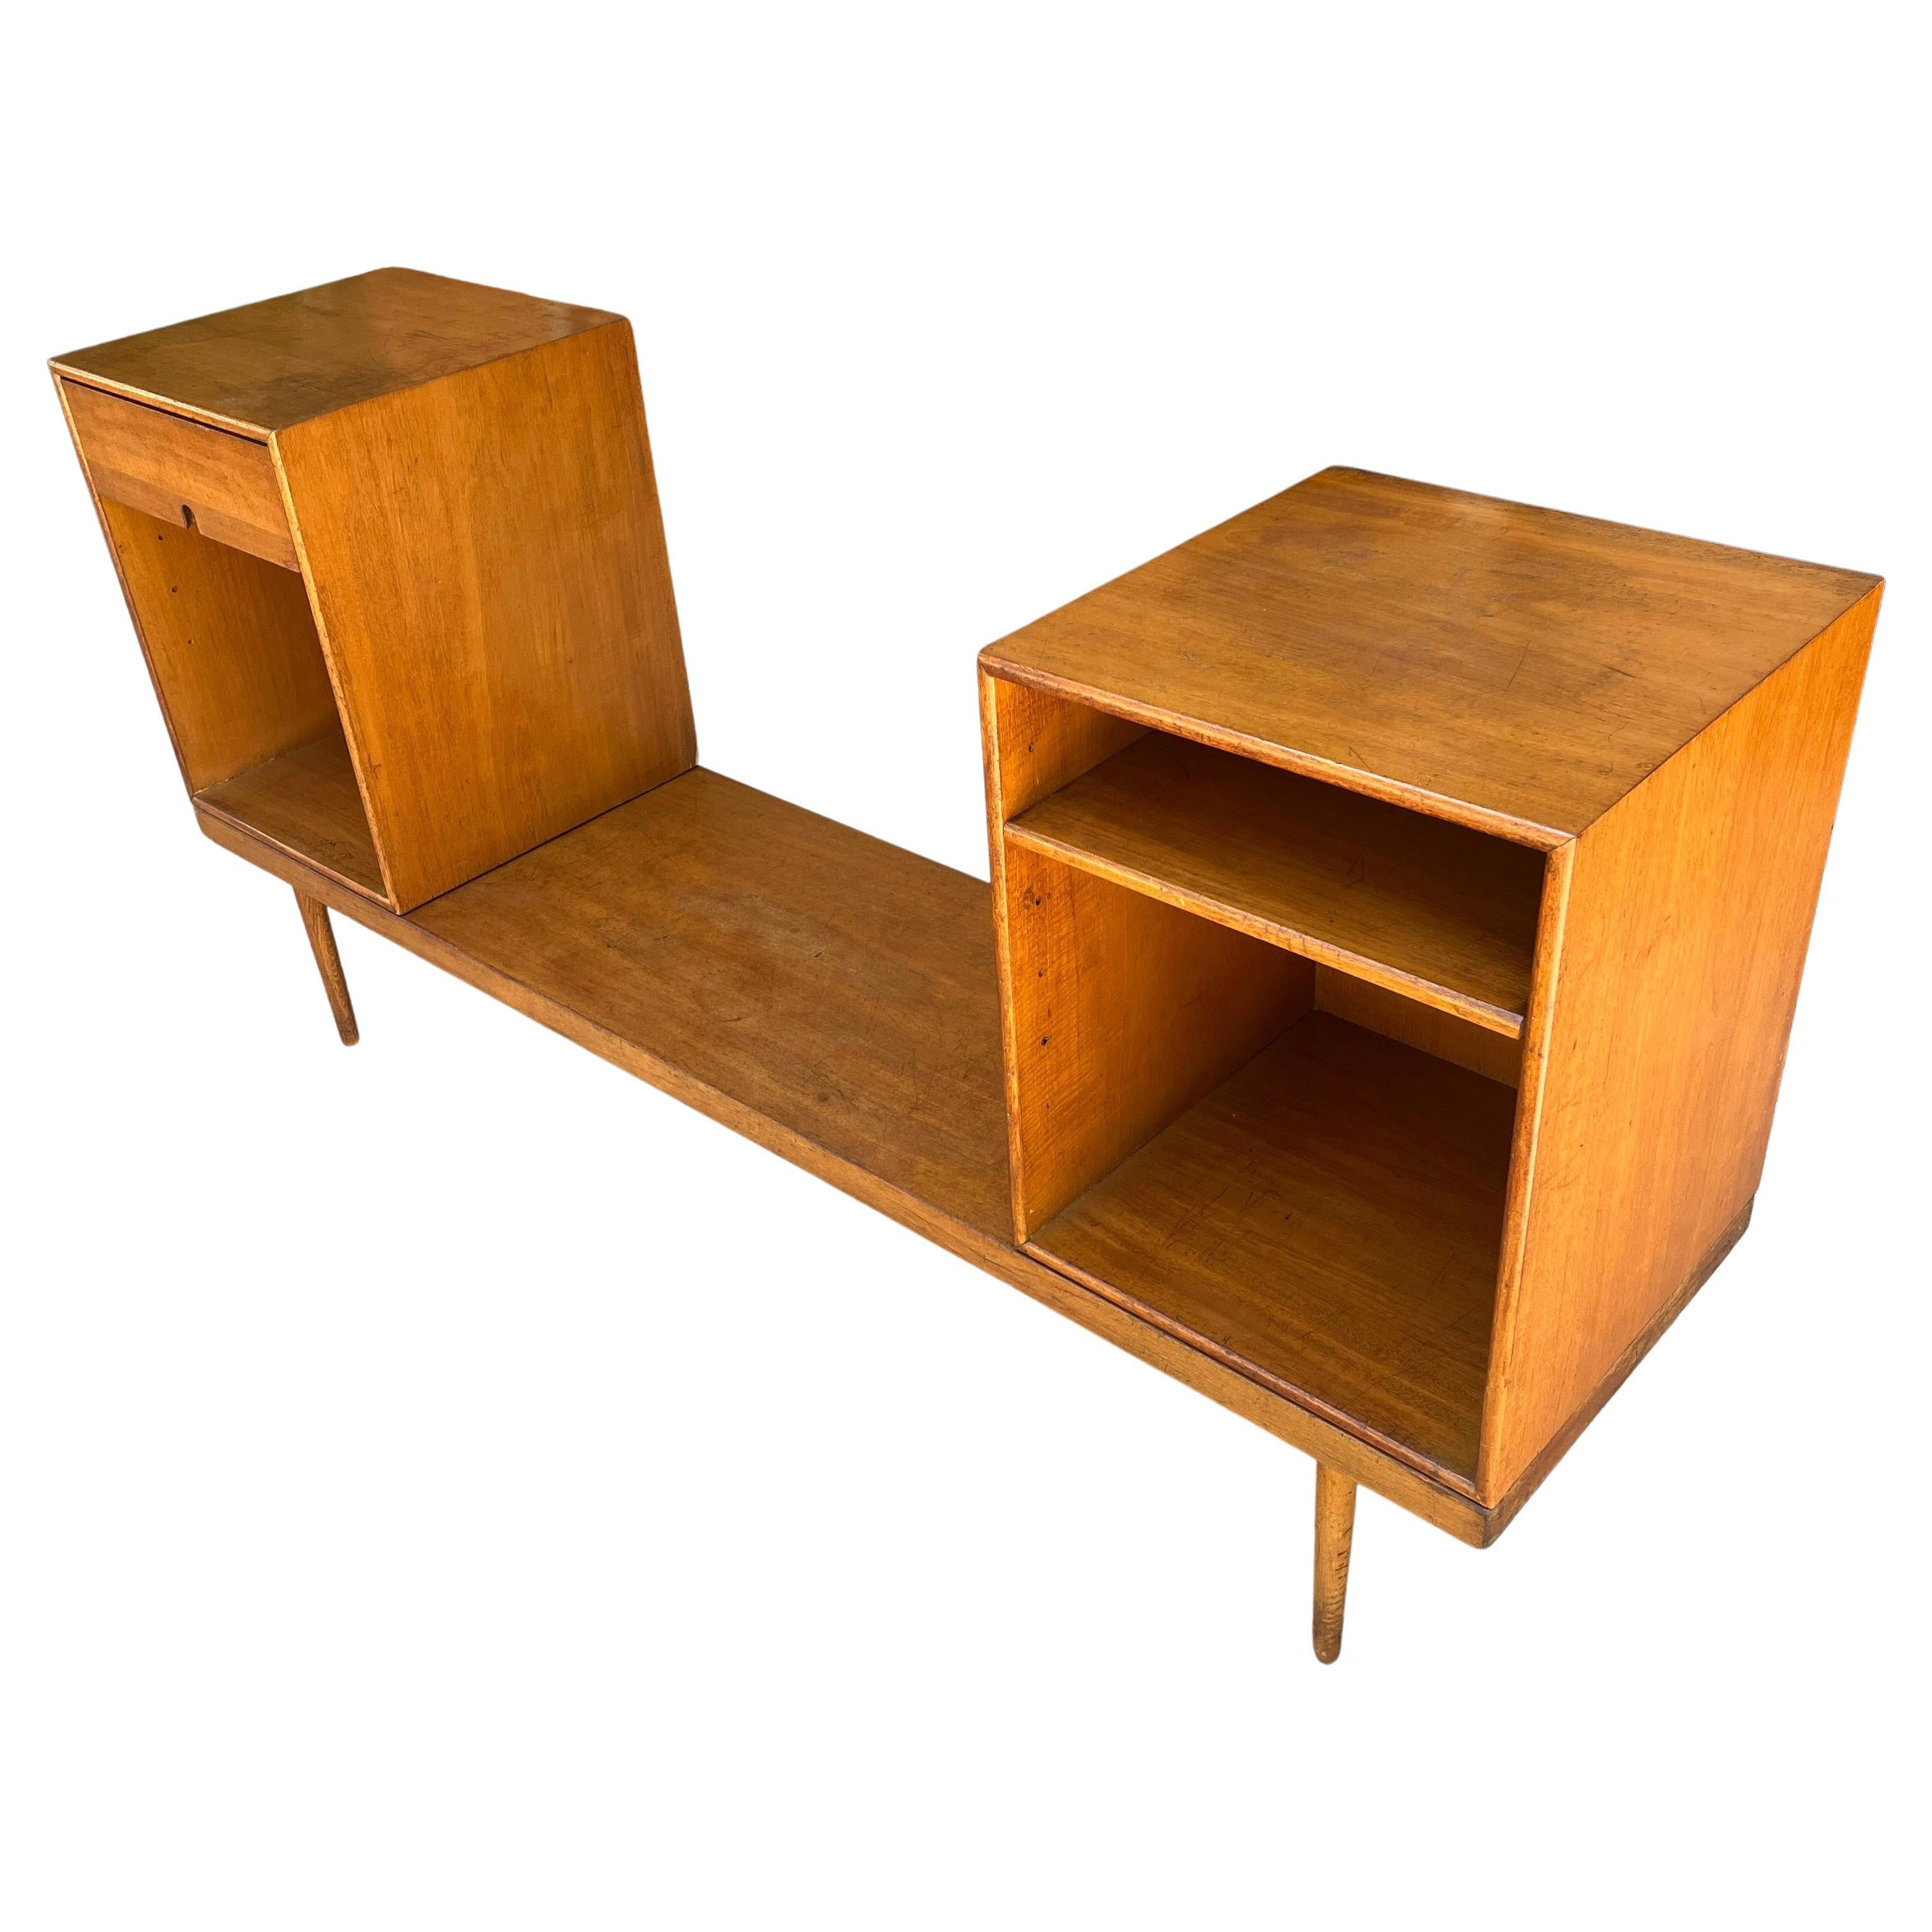 Very Rare modular case pieces conceived by young Charles Eames and Eero Saarinen for the Organic Design Competition at the MoMA.  Circa 1940. Produced by Red Lion Furniture Company.  Own a piece of design History!

13-1/4 x 72 x 18 inches (33.7 x